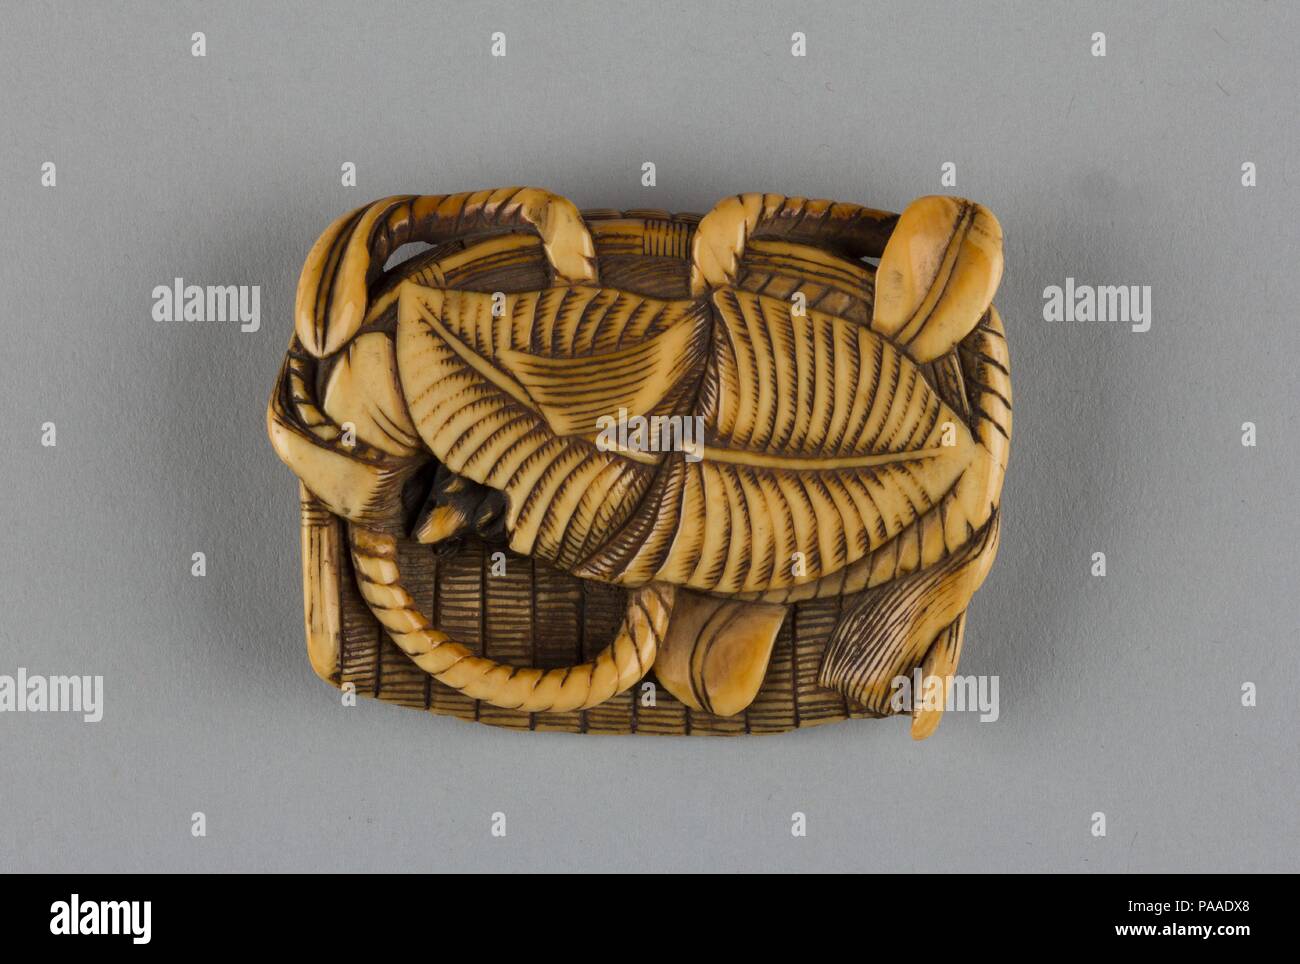 Netsuke of Flat Basket Containing Leaves and a Mouse. Culture: Japan. Dimensions: H. 3/4 in. (1.9 cm); W. 2 7/8 in. (7.3 cm); D. 2 in. (5.1 cm). Date: 19th century. Museum: Metropolitan Museum of Art, New York, USA. Stock Photo